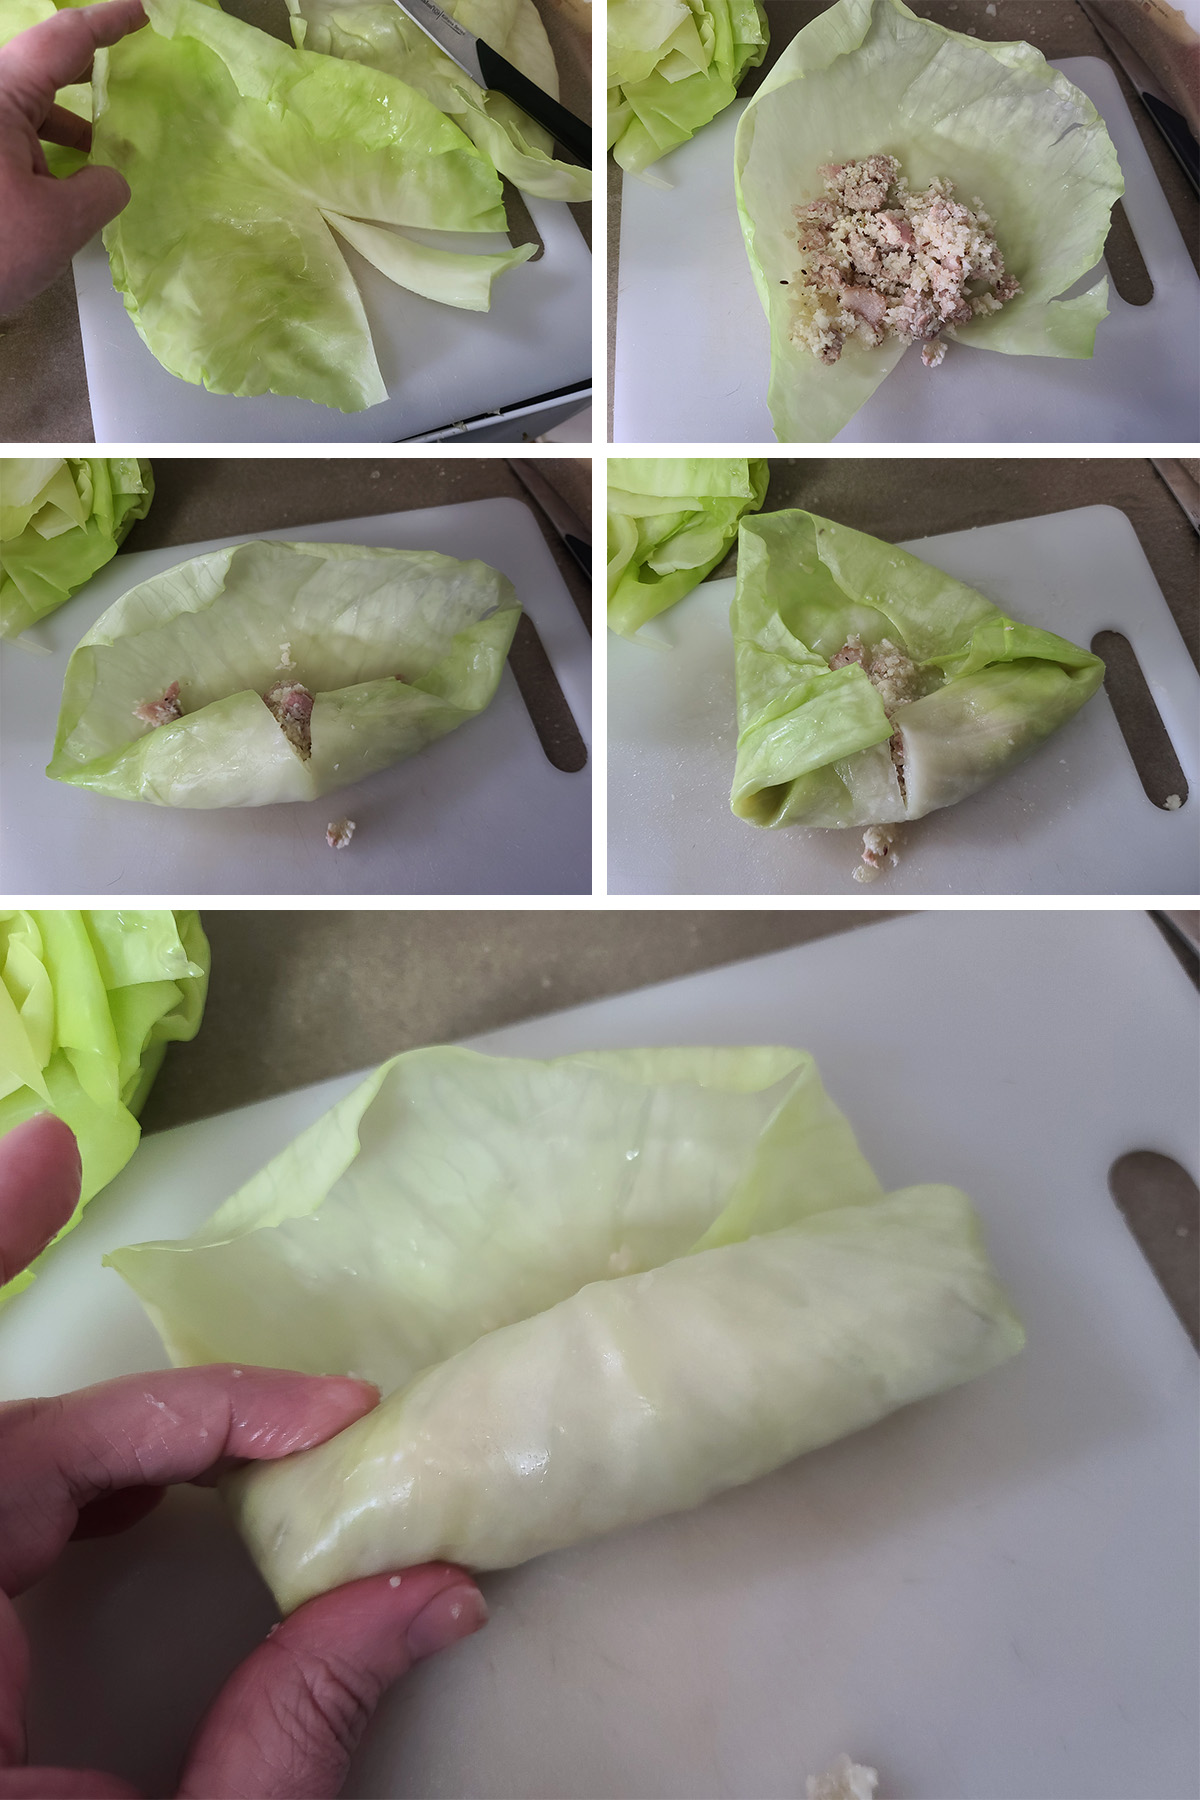 A 5 part image showing a cabbage roll being assembled, as described.